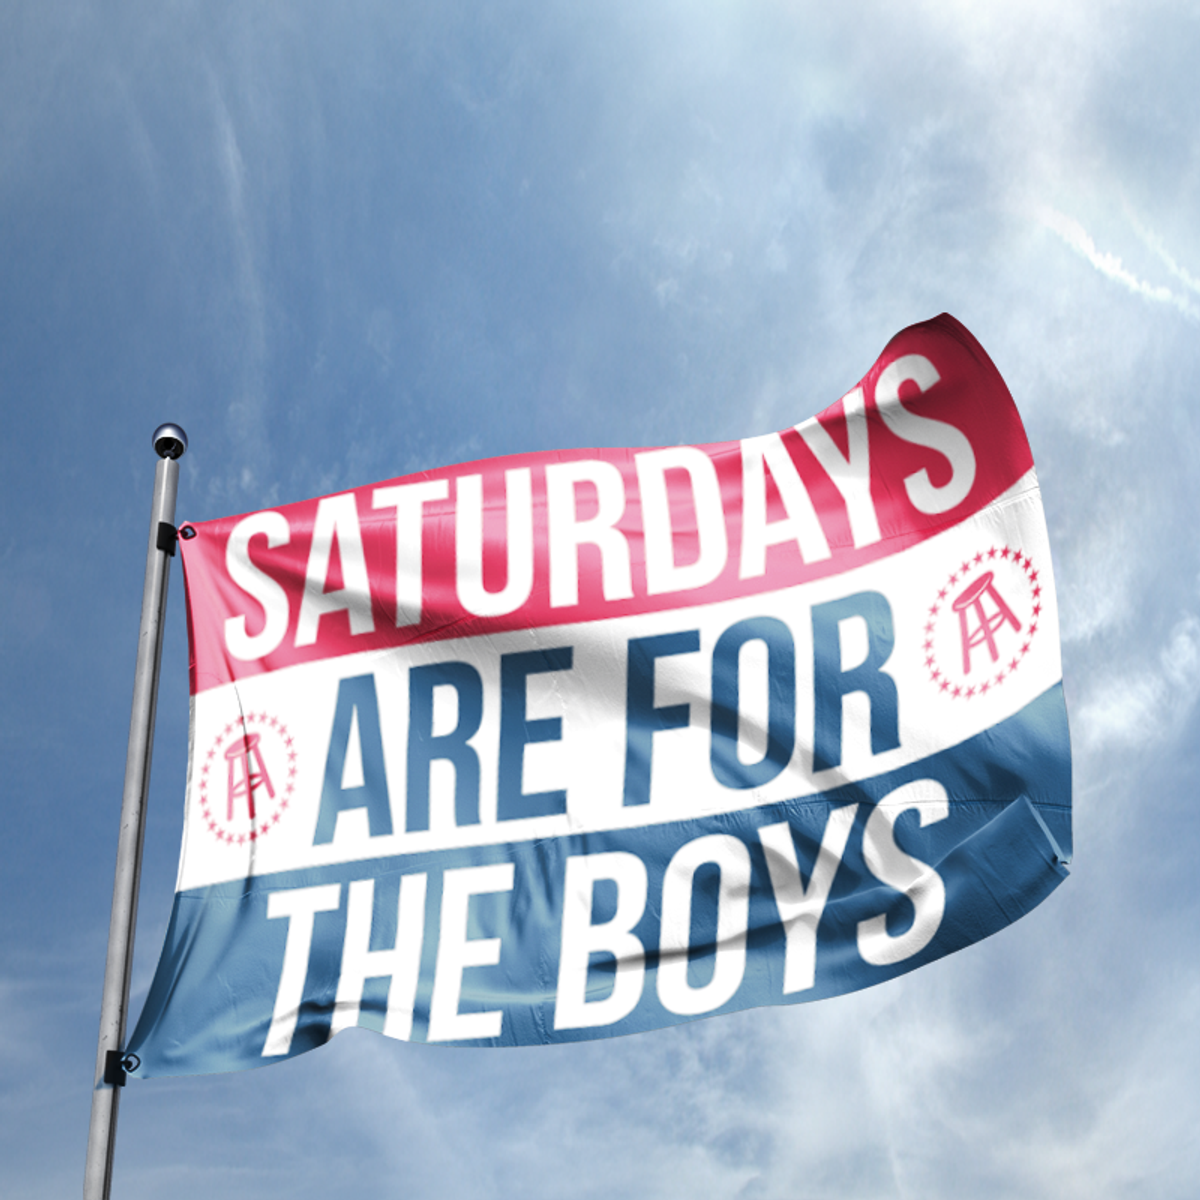 Why "Saturdays Are For The Boys" Matters